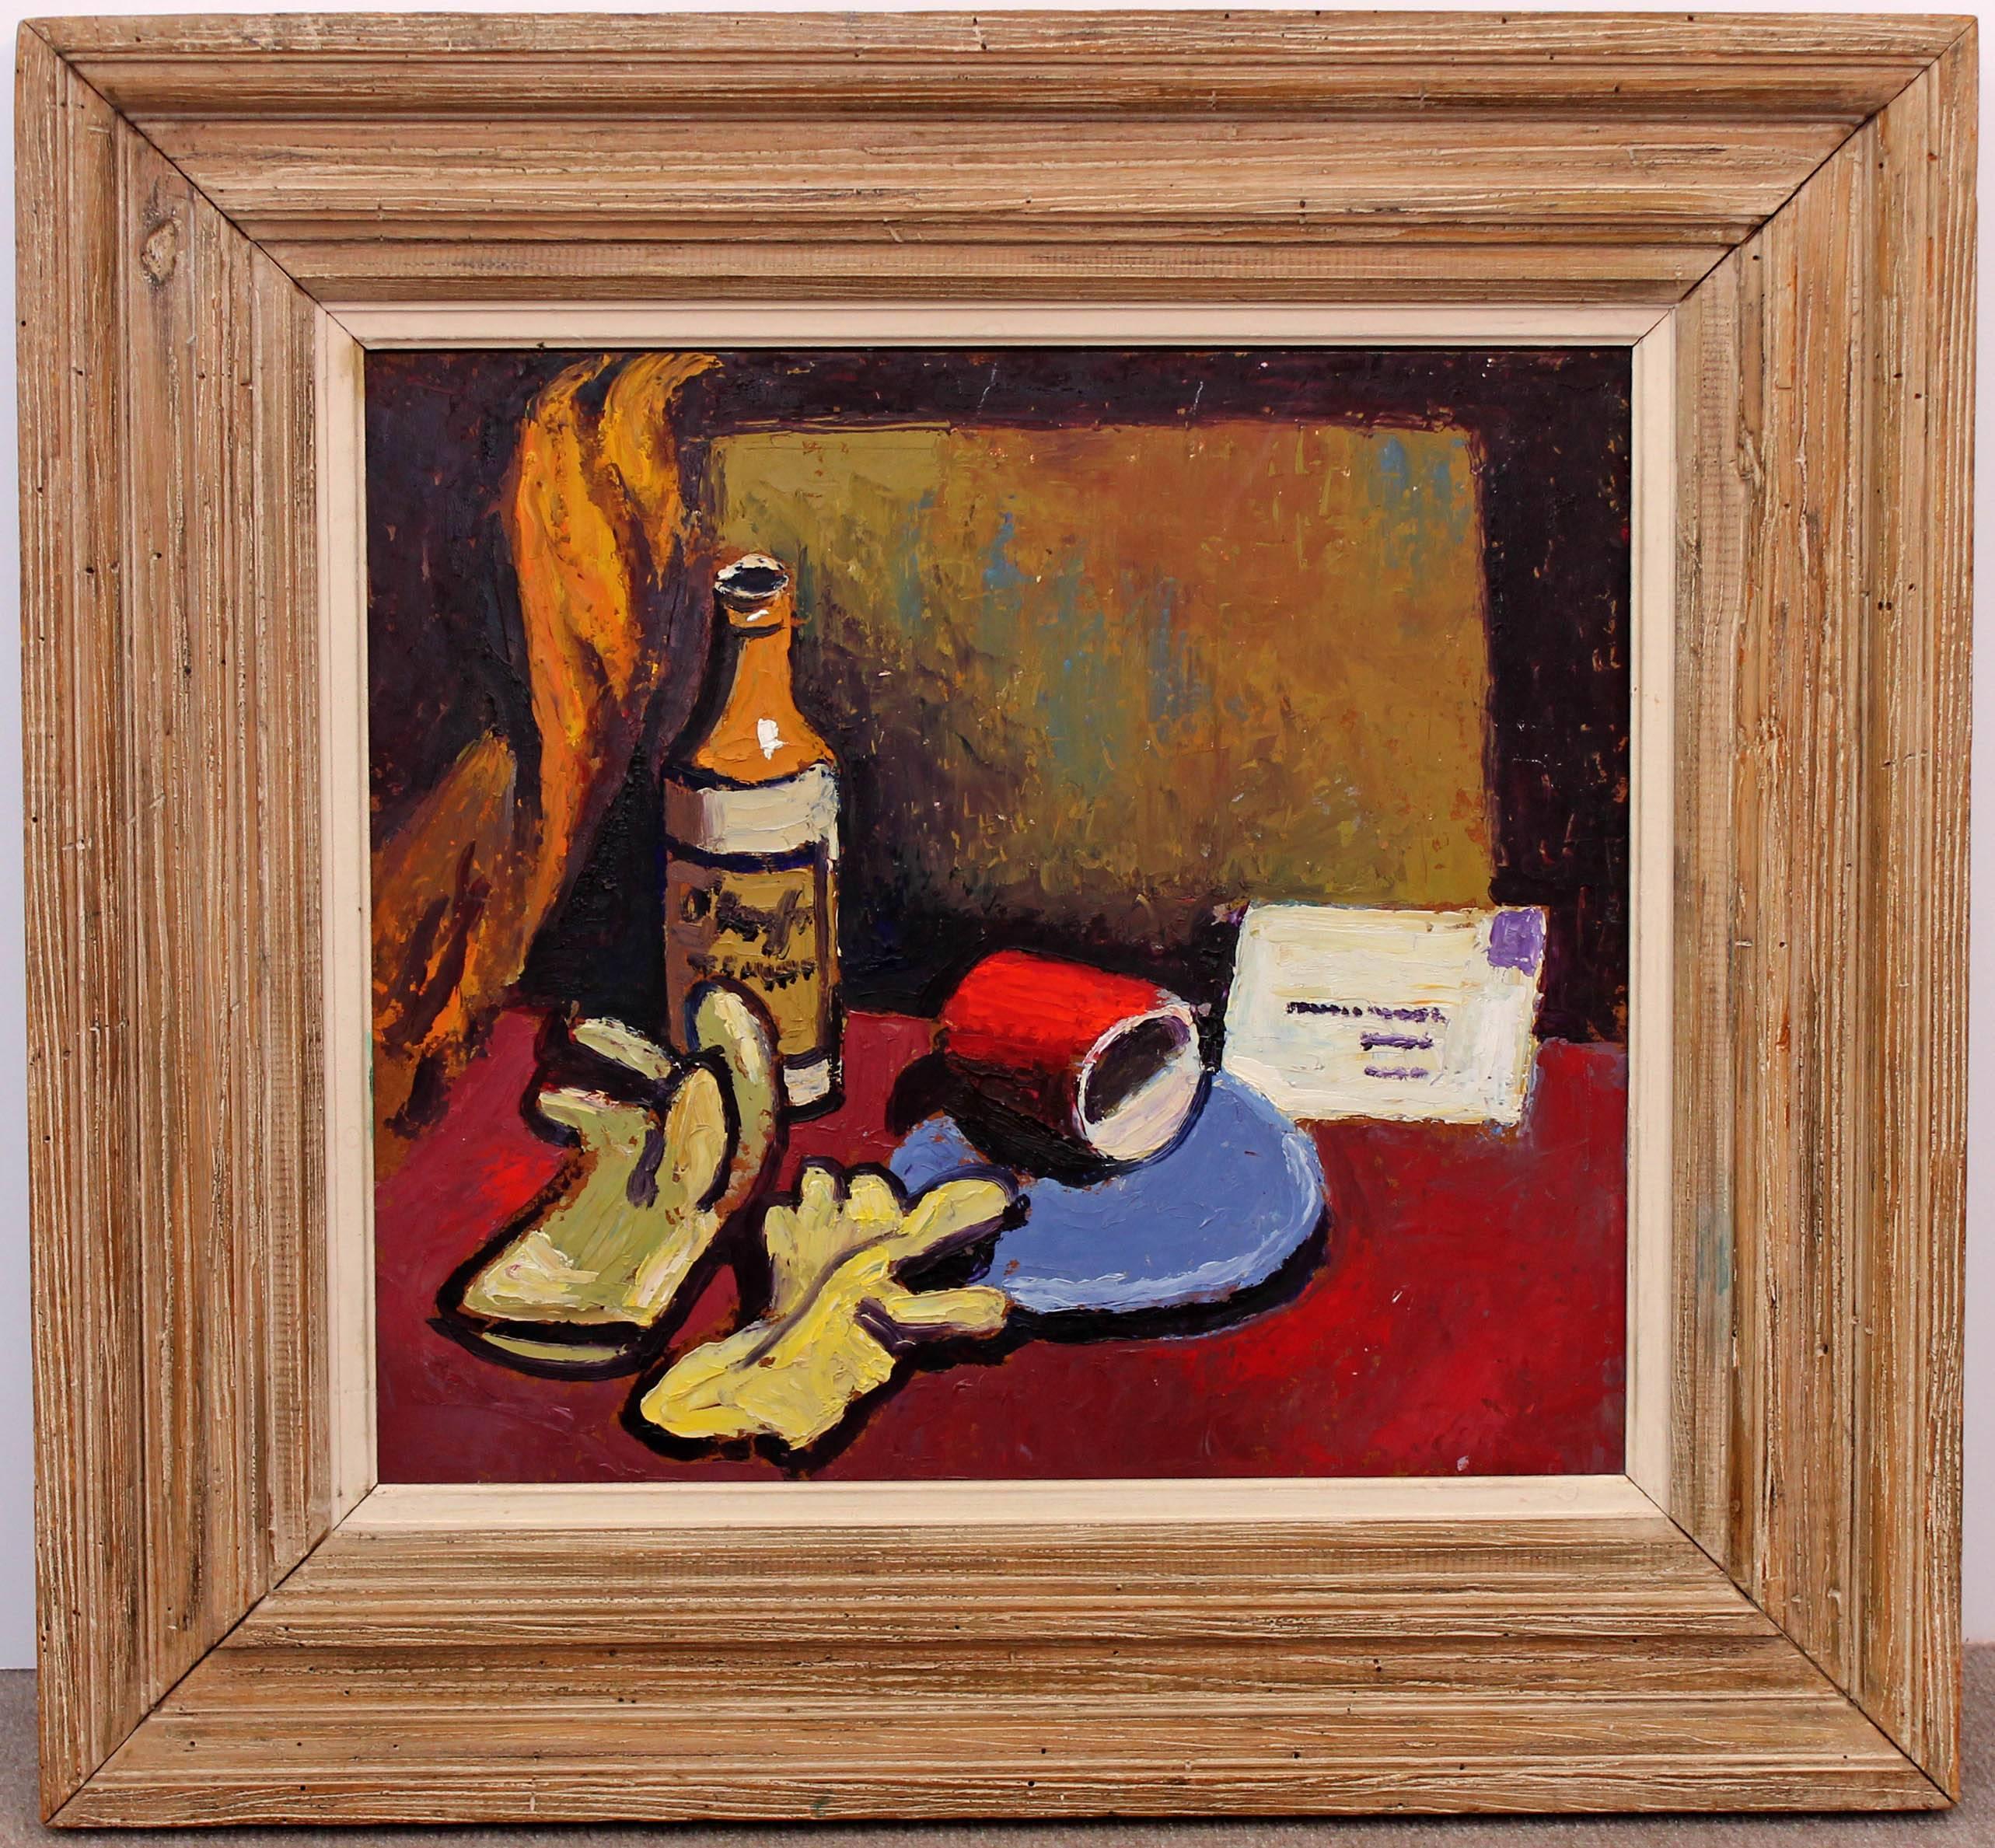 Colorful and bold oil painting with heavy impasto. Oil on panel. Still life by Henri Gaudriot. Dated 1944. In period oak frame. Exhibited Rochester, New York finger lakes show, 1944.